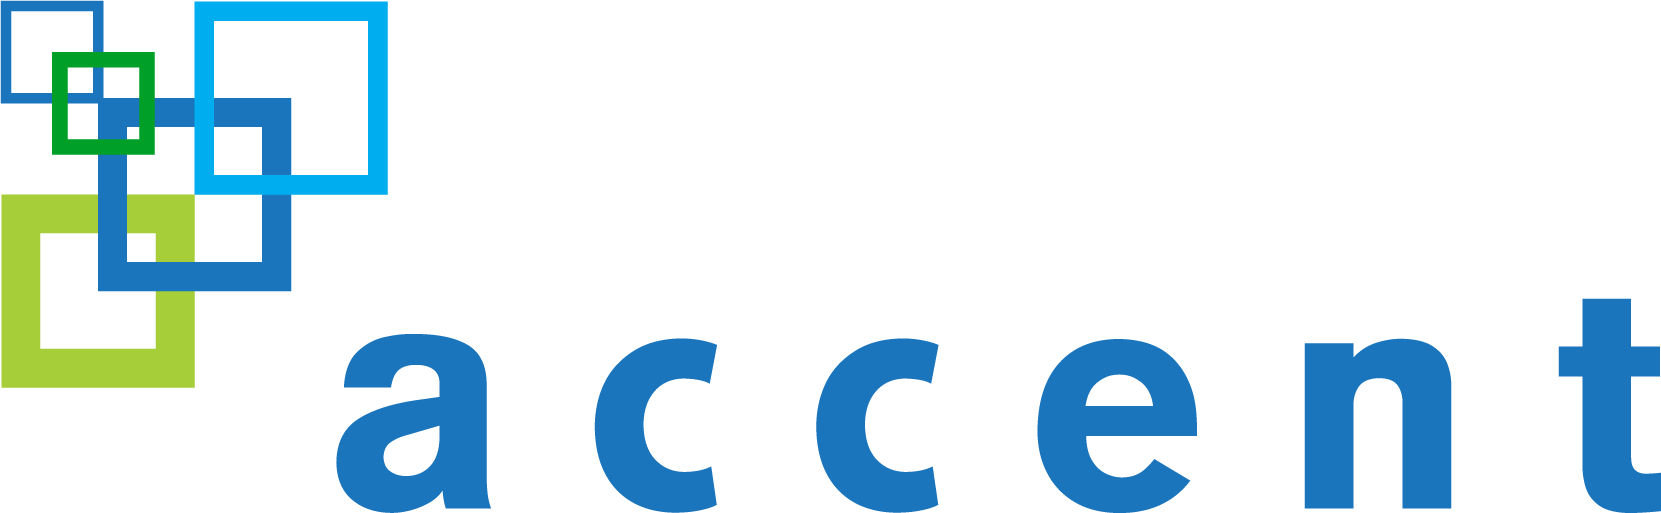 Download Accent Logo C3 - Accent Technologies PNG Image with No Background - PNGkey.com